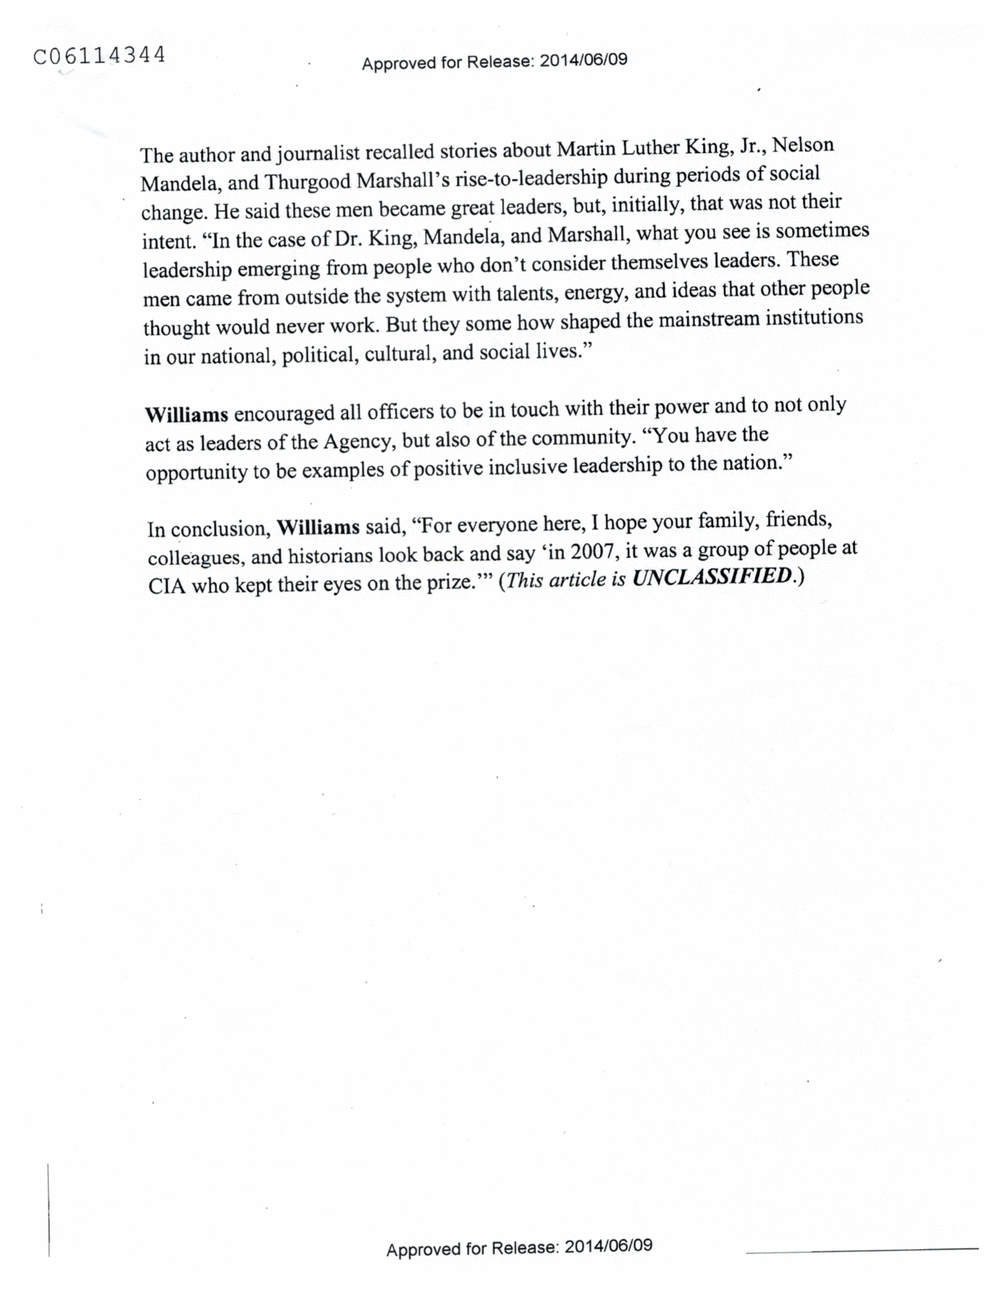 Page 568 from Email Correspondence Between Reporters and CIA Flacks